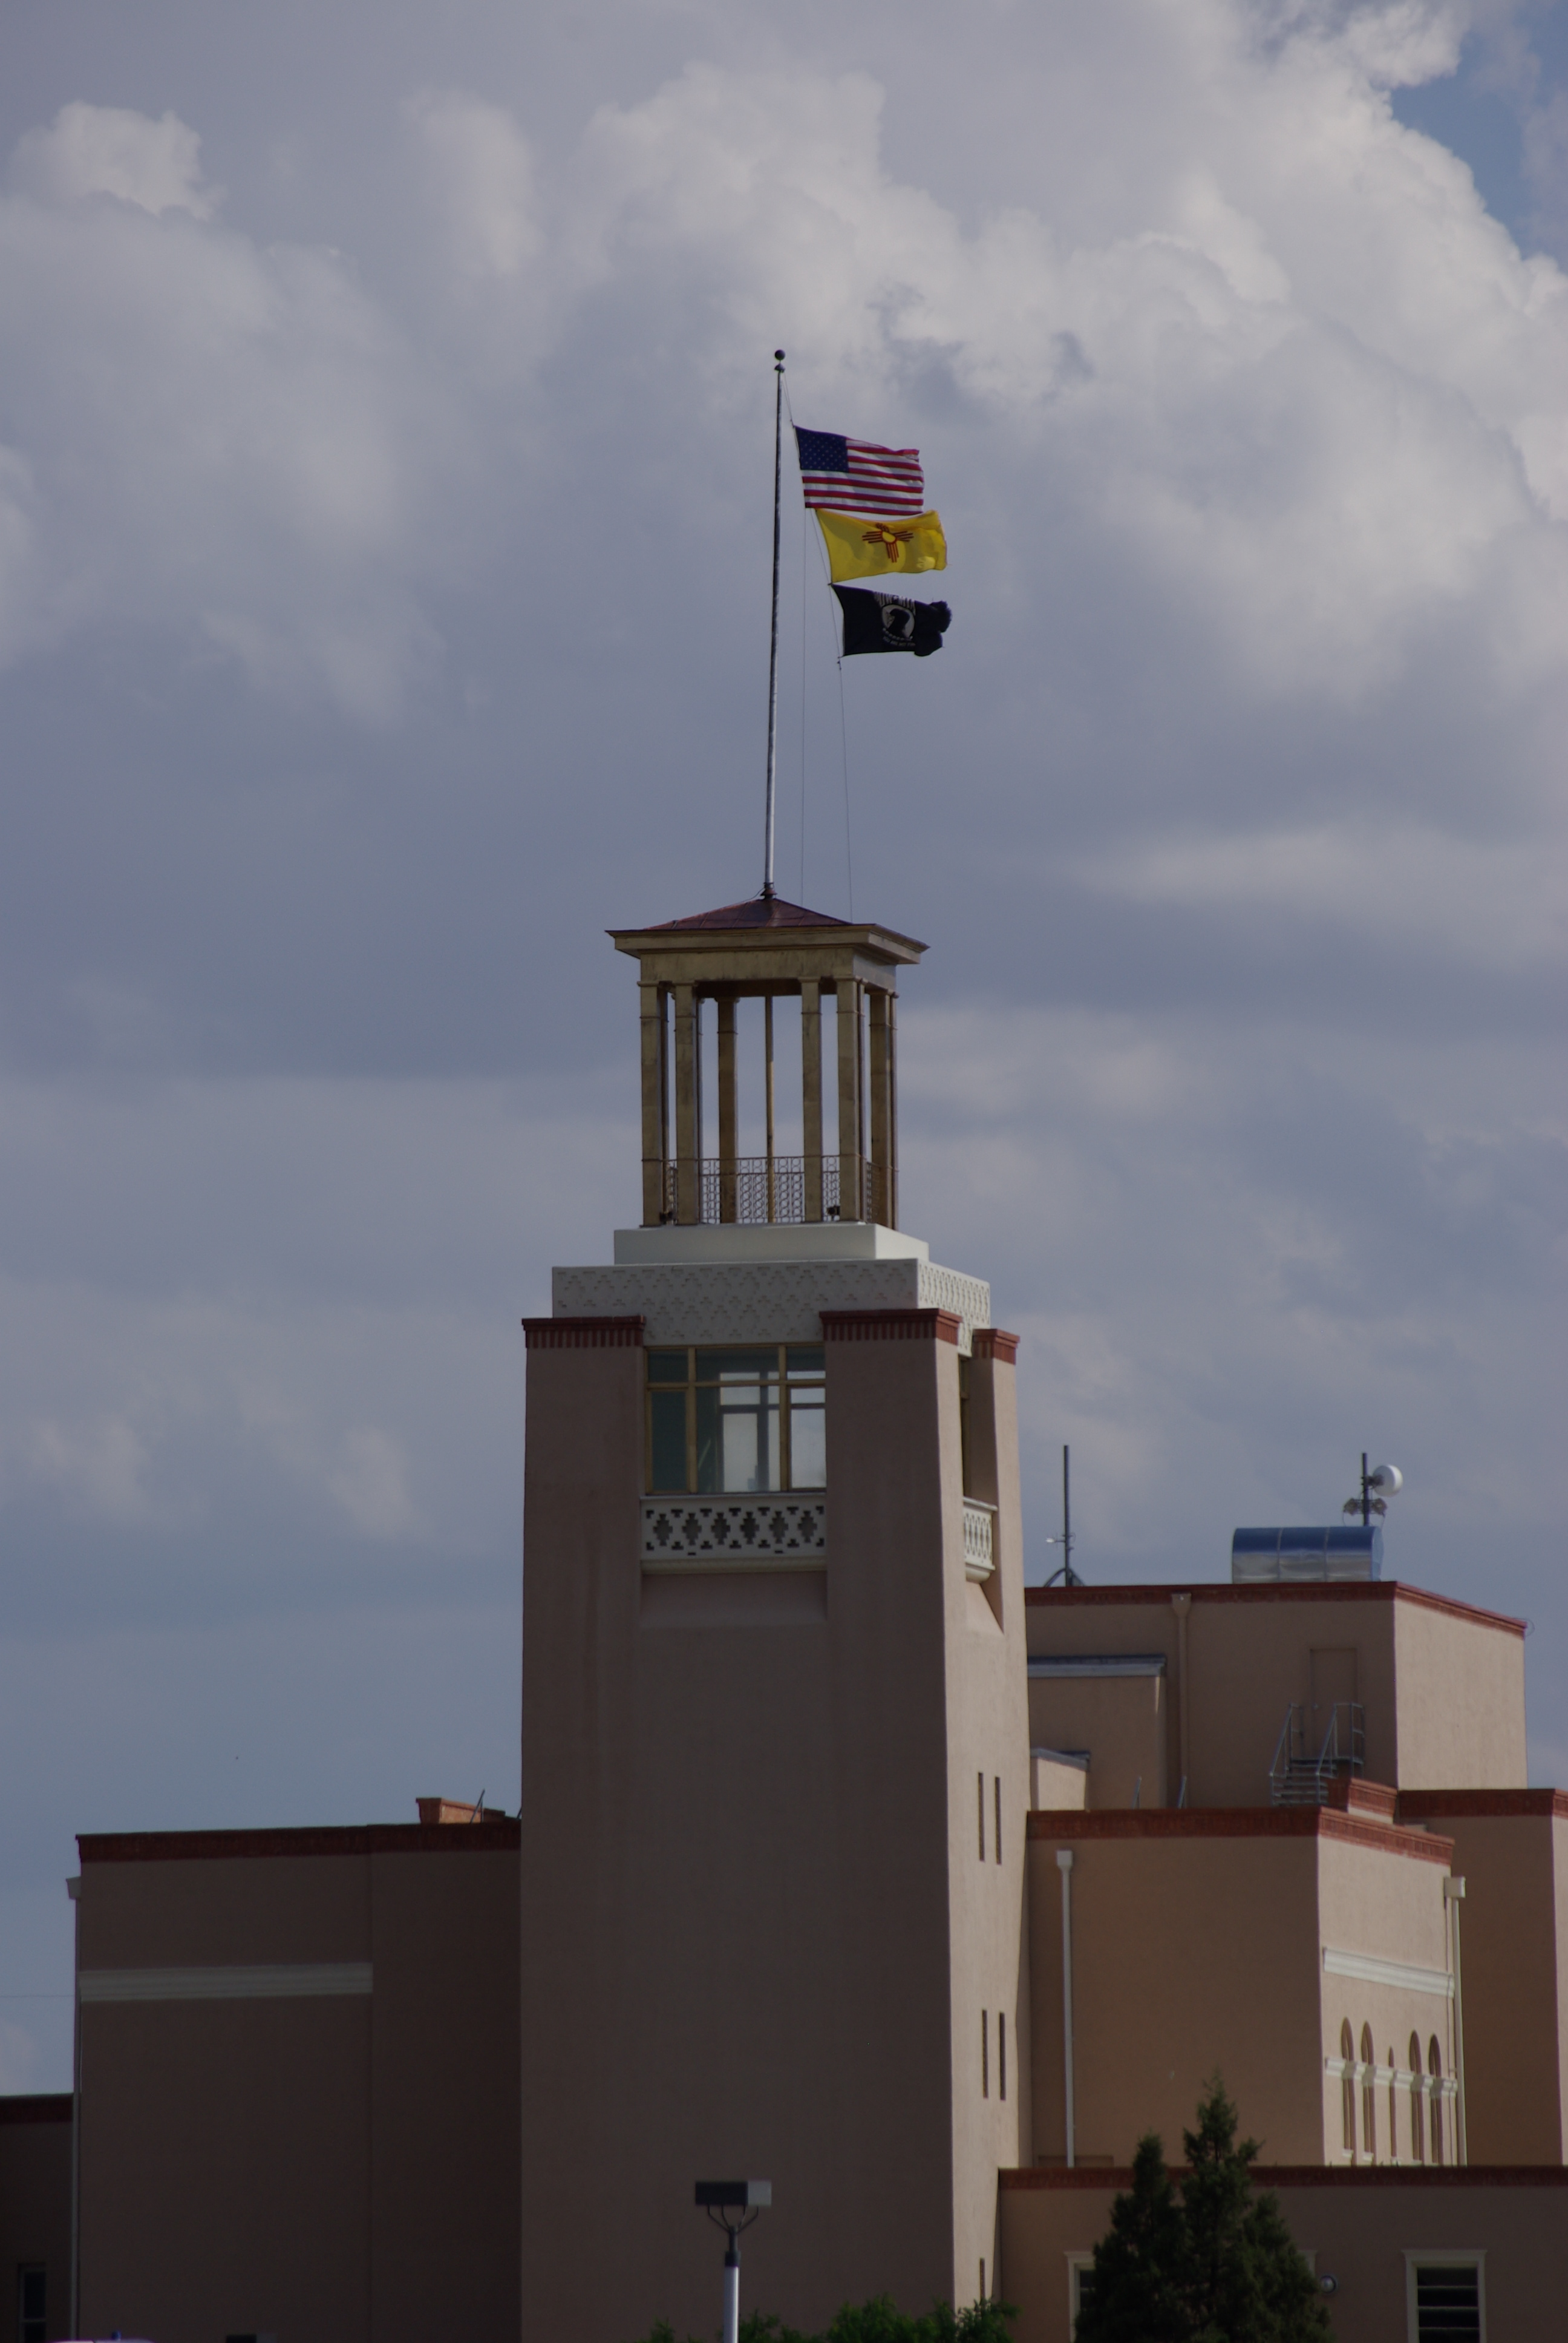 U.S. and New Mexico flags fly from the state education administration building in Santa Fe, 2014